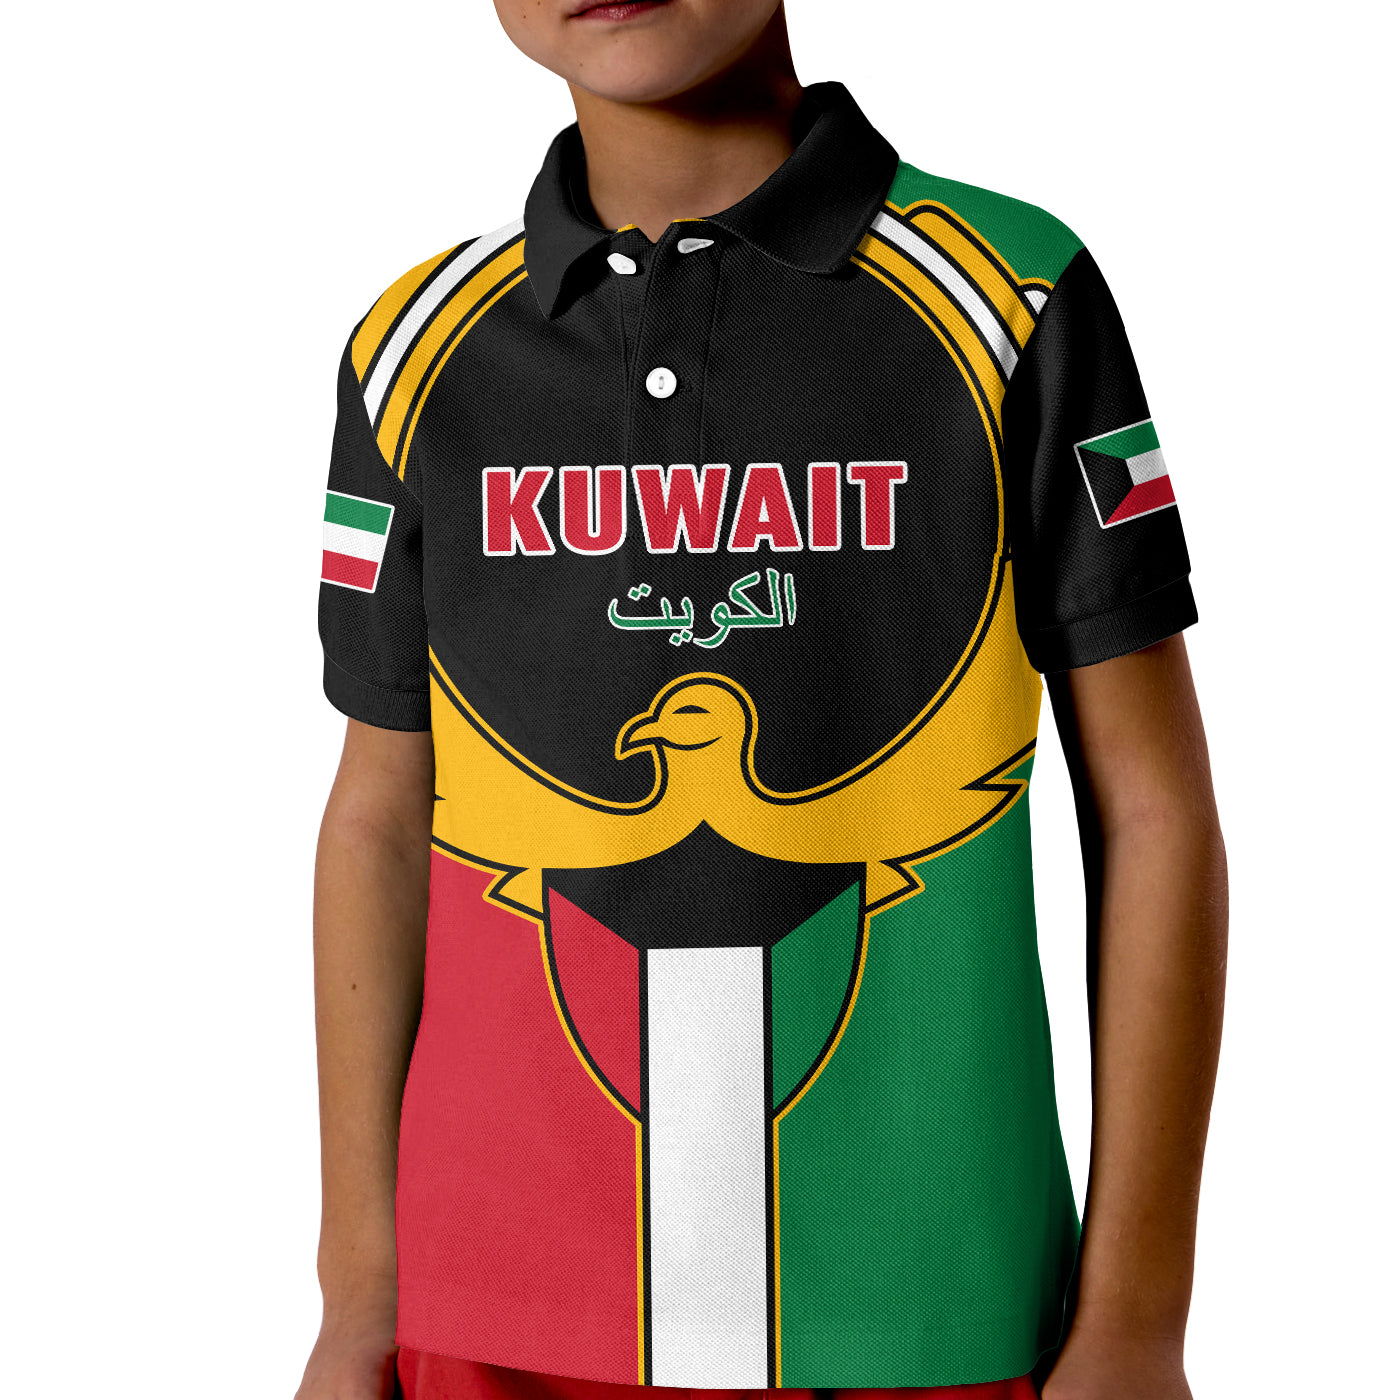 kuwait-polo-shirt-kid-happy-independence-day-with-coat-of-arms